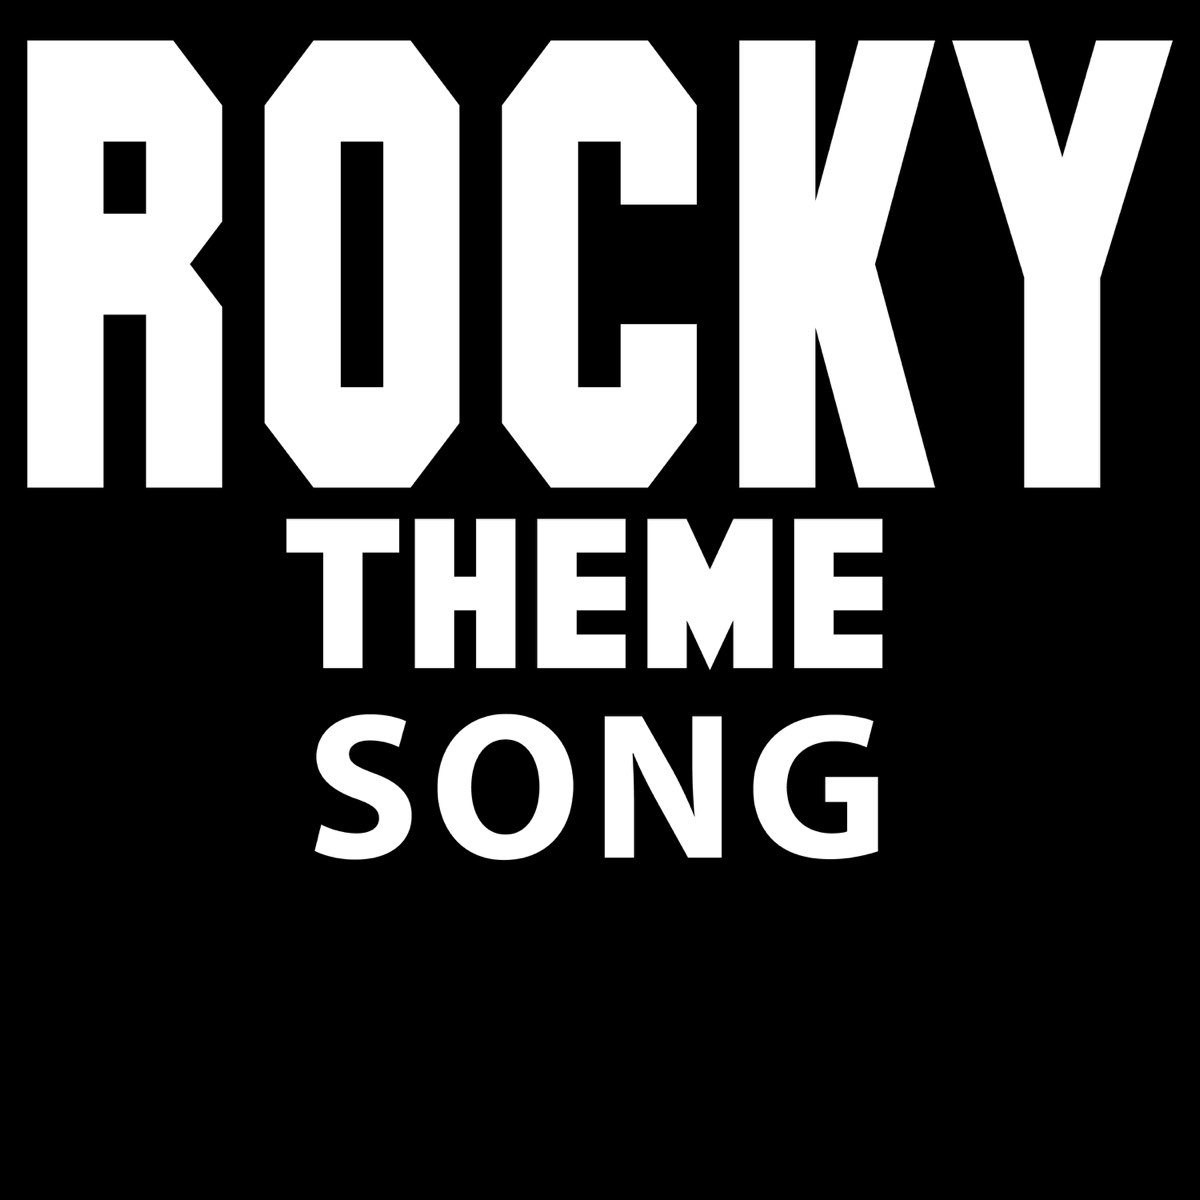 Rock theme. Rocky Theme Song. Theme from Rocky. The Theme guys. Rock guy.